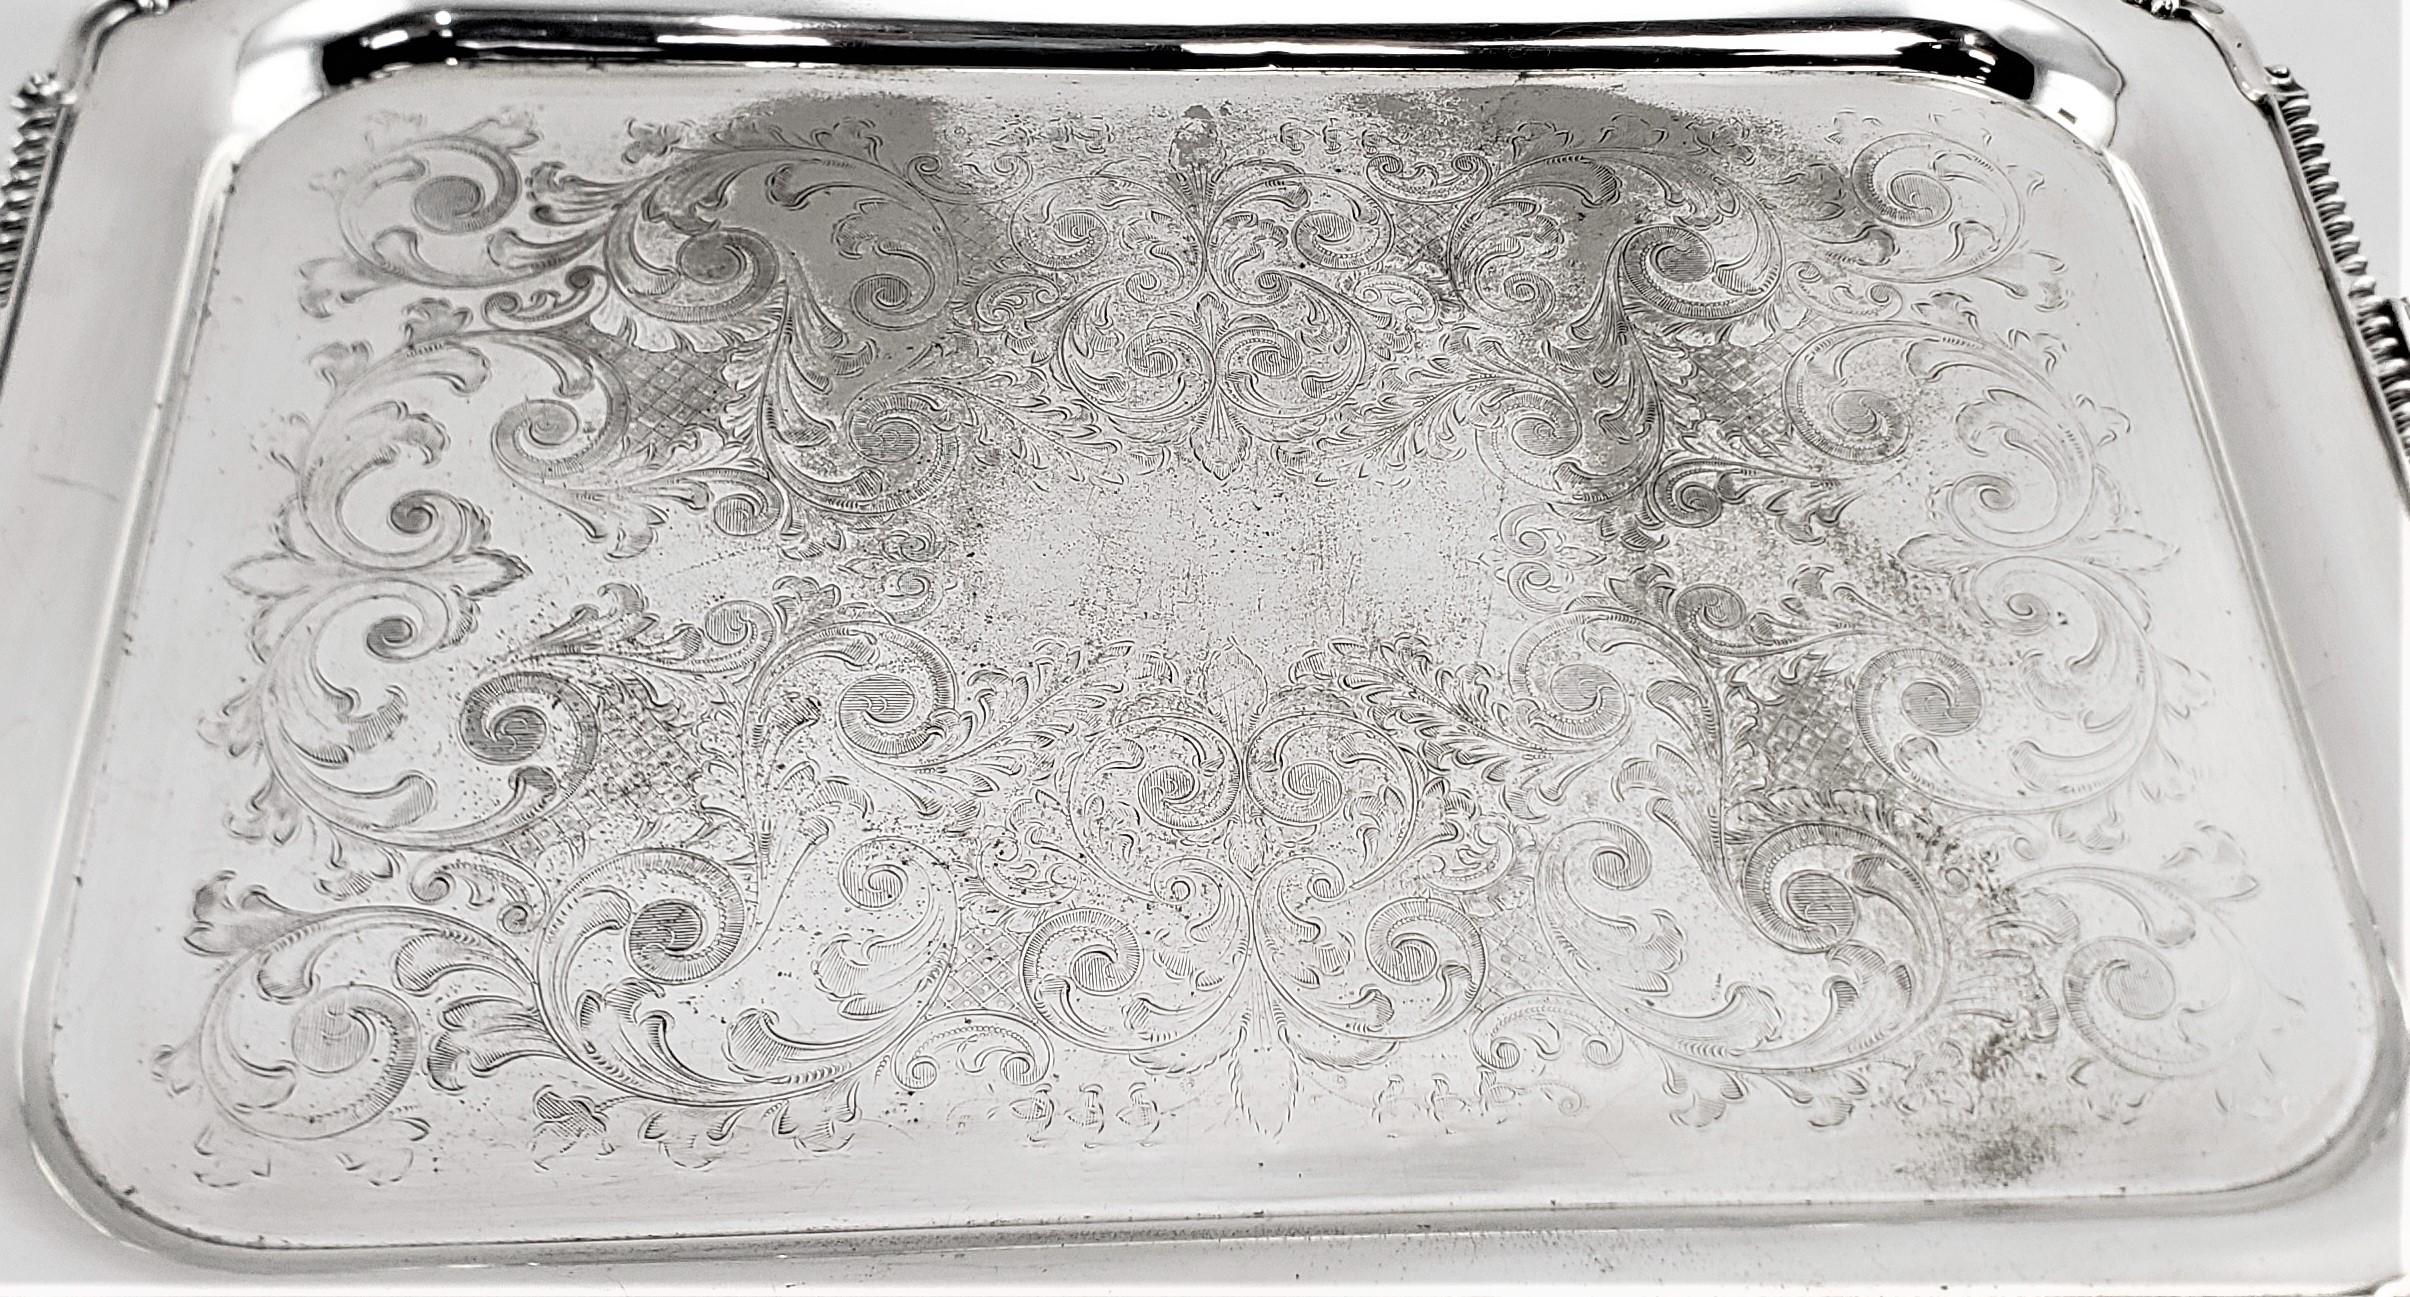 Large Antique English Edwardian Styled Rectangular Silver Plated Serving Tray 4